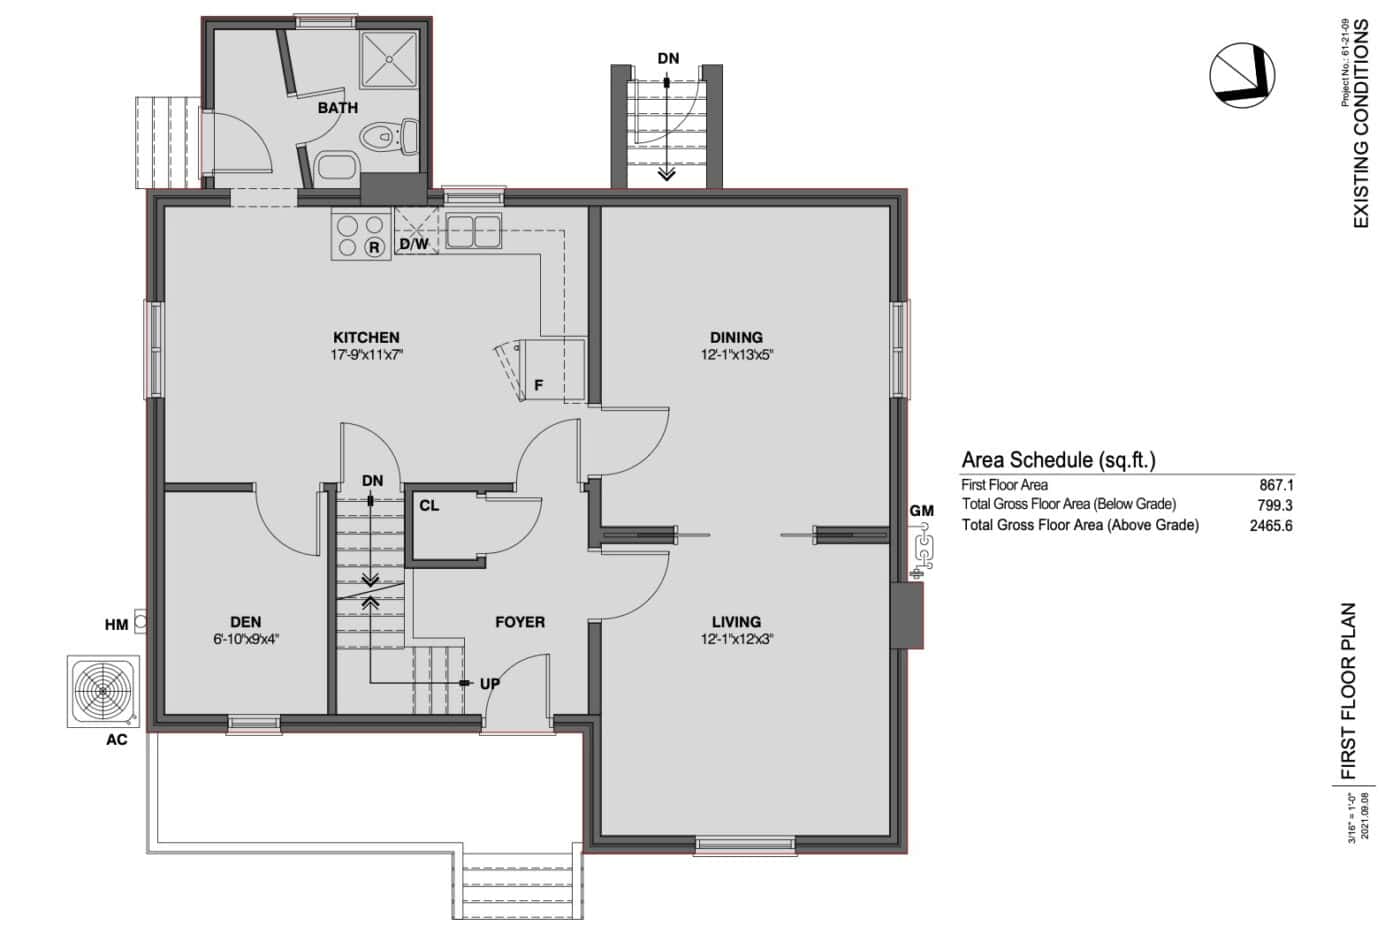 Detailed as-built architectural floor plan for home renovation project